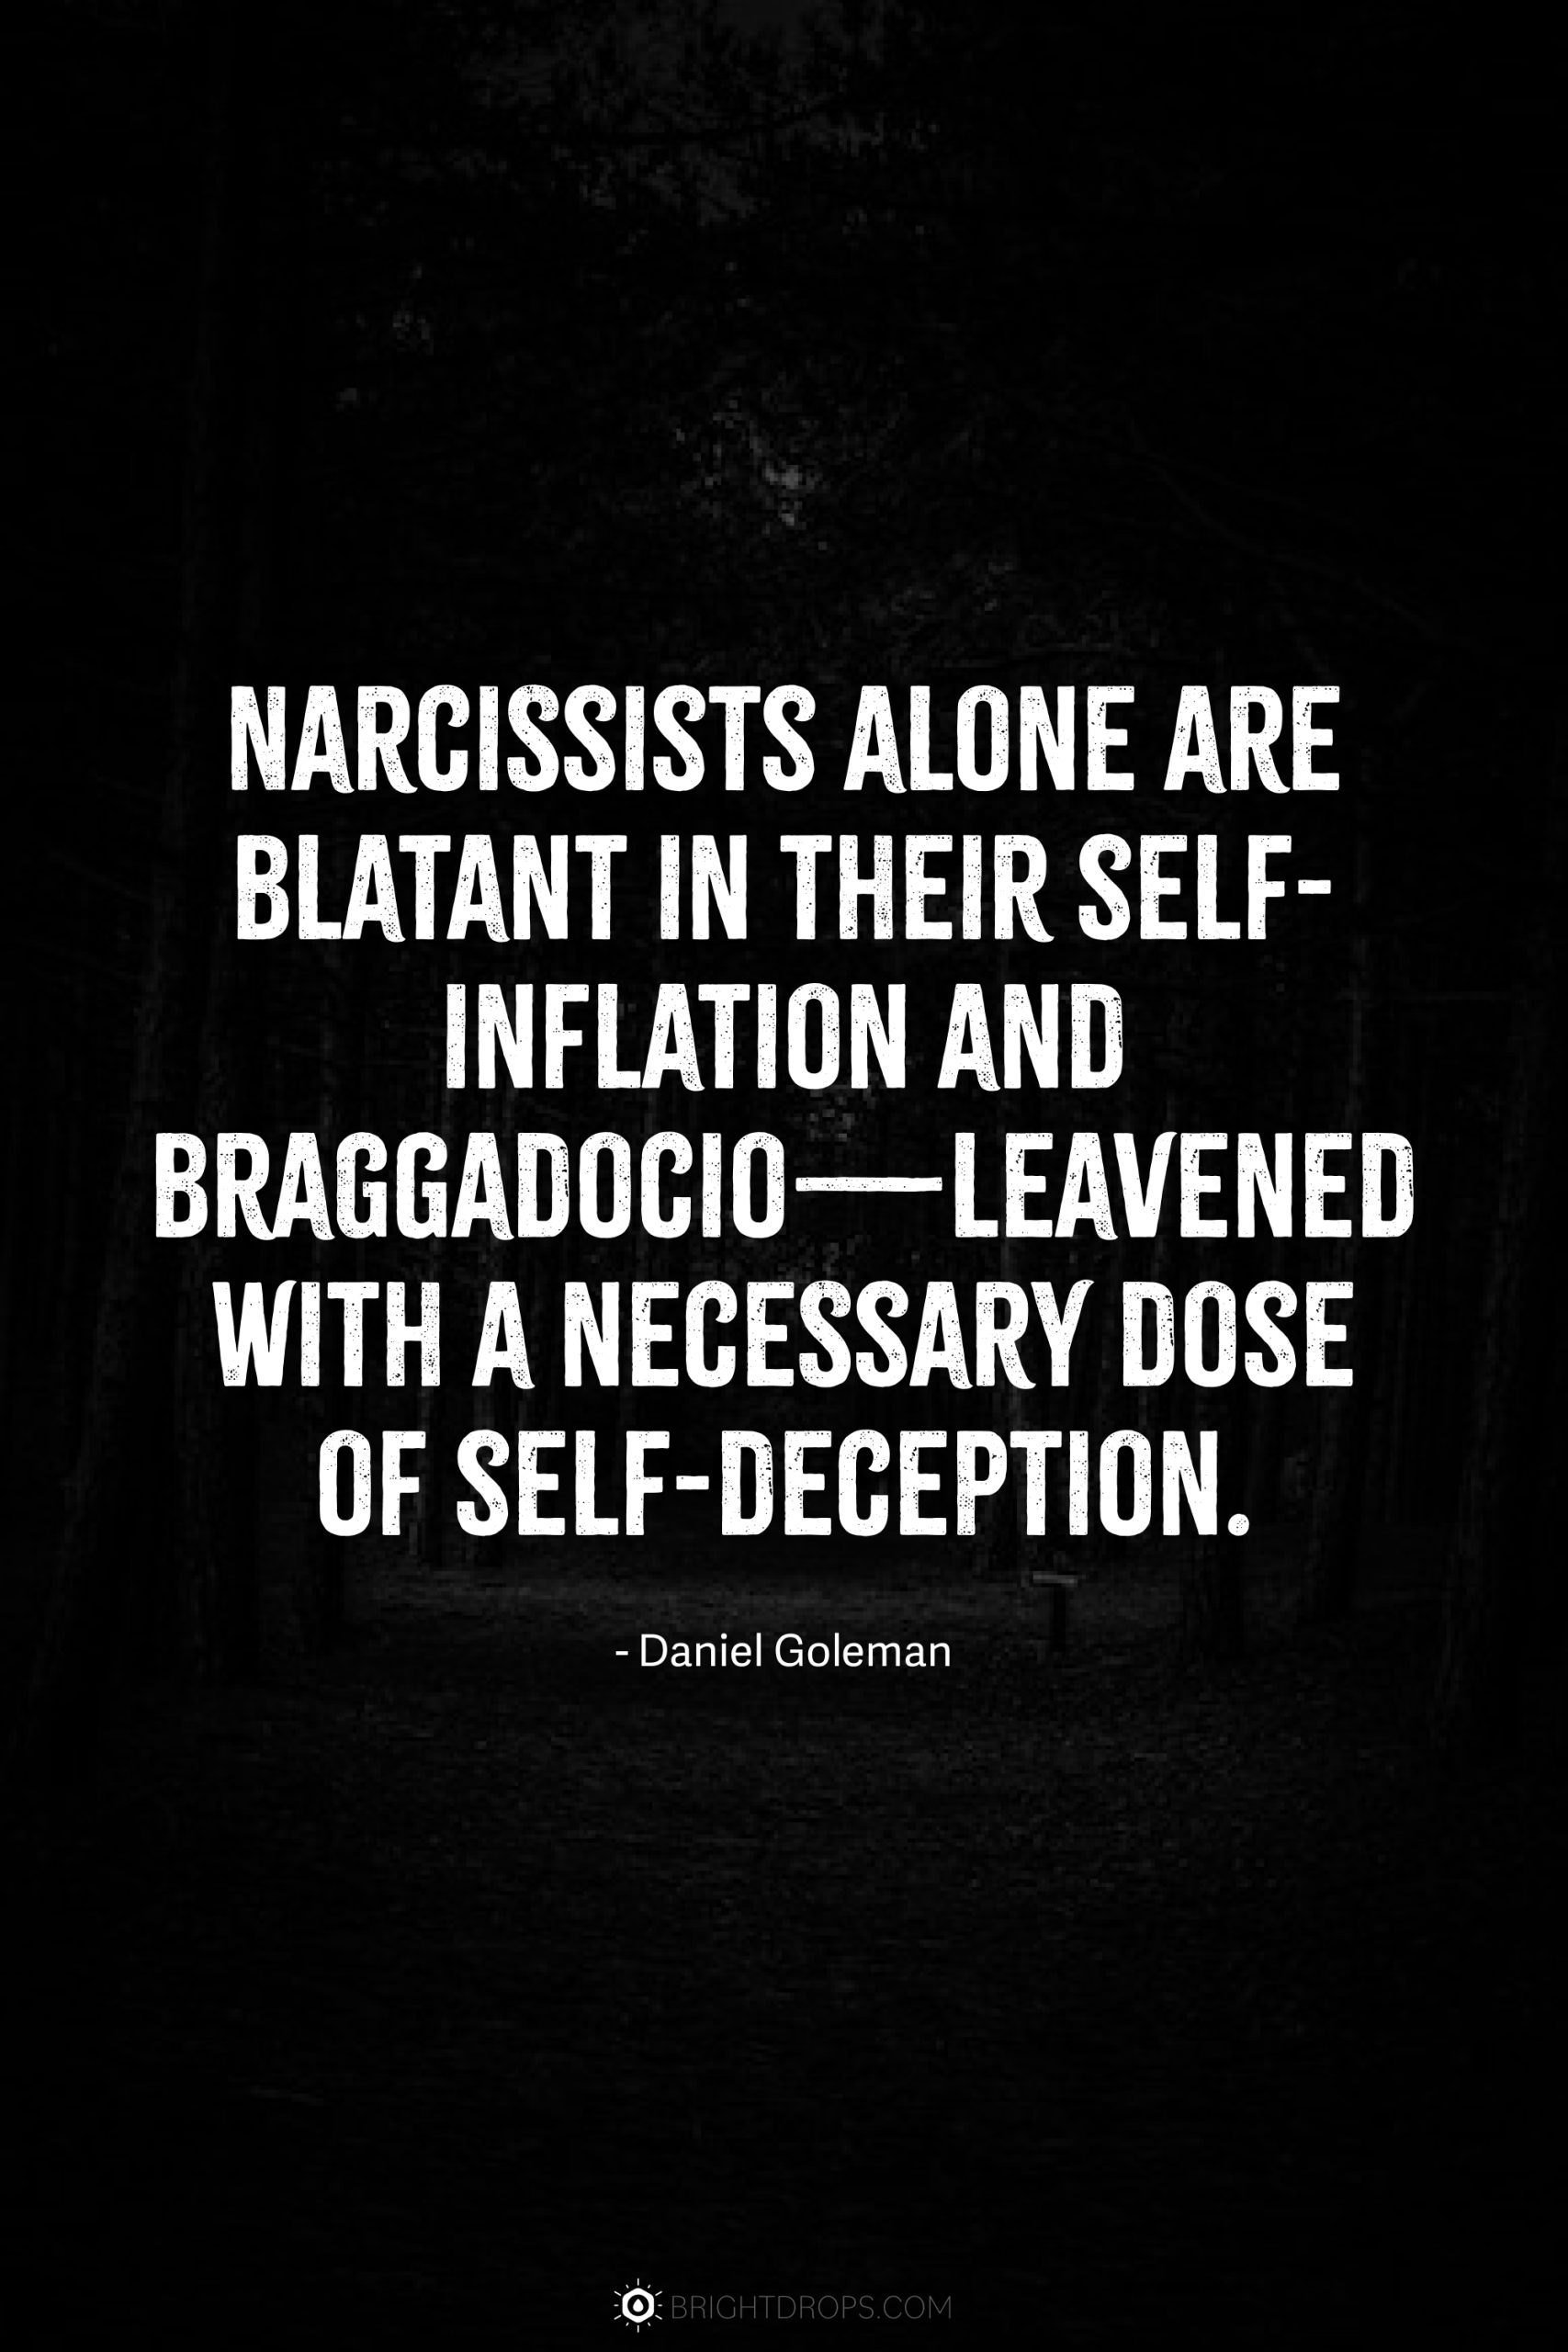 Narcissists alone are blatant in their self-inflation and braggadocio—leavened with a necessary dose of self-deception.